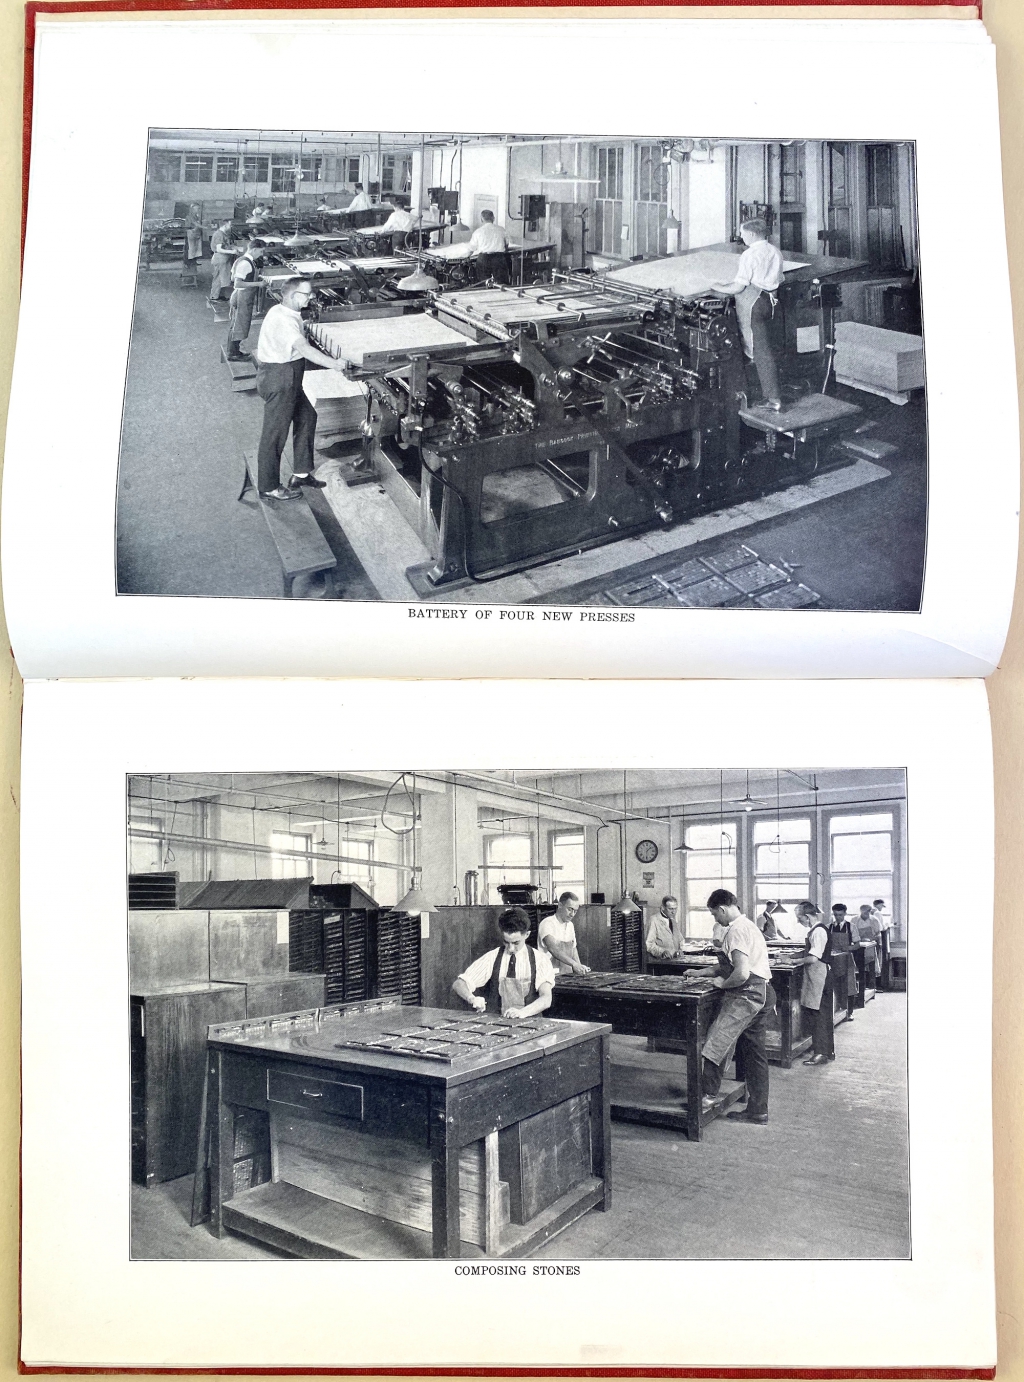 Upper page: Battery of Four New Presses; Lower page: Composing Stones. In the foreground a printer appears to be working out the imposition of stereotype plates.